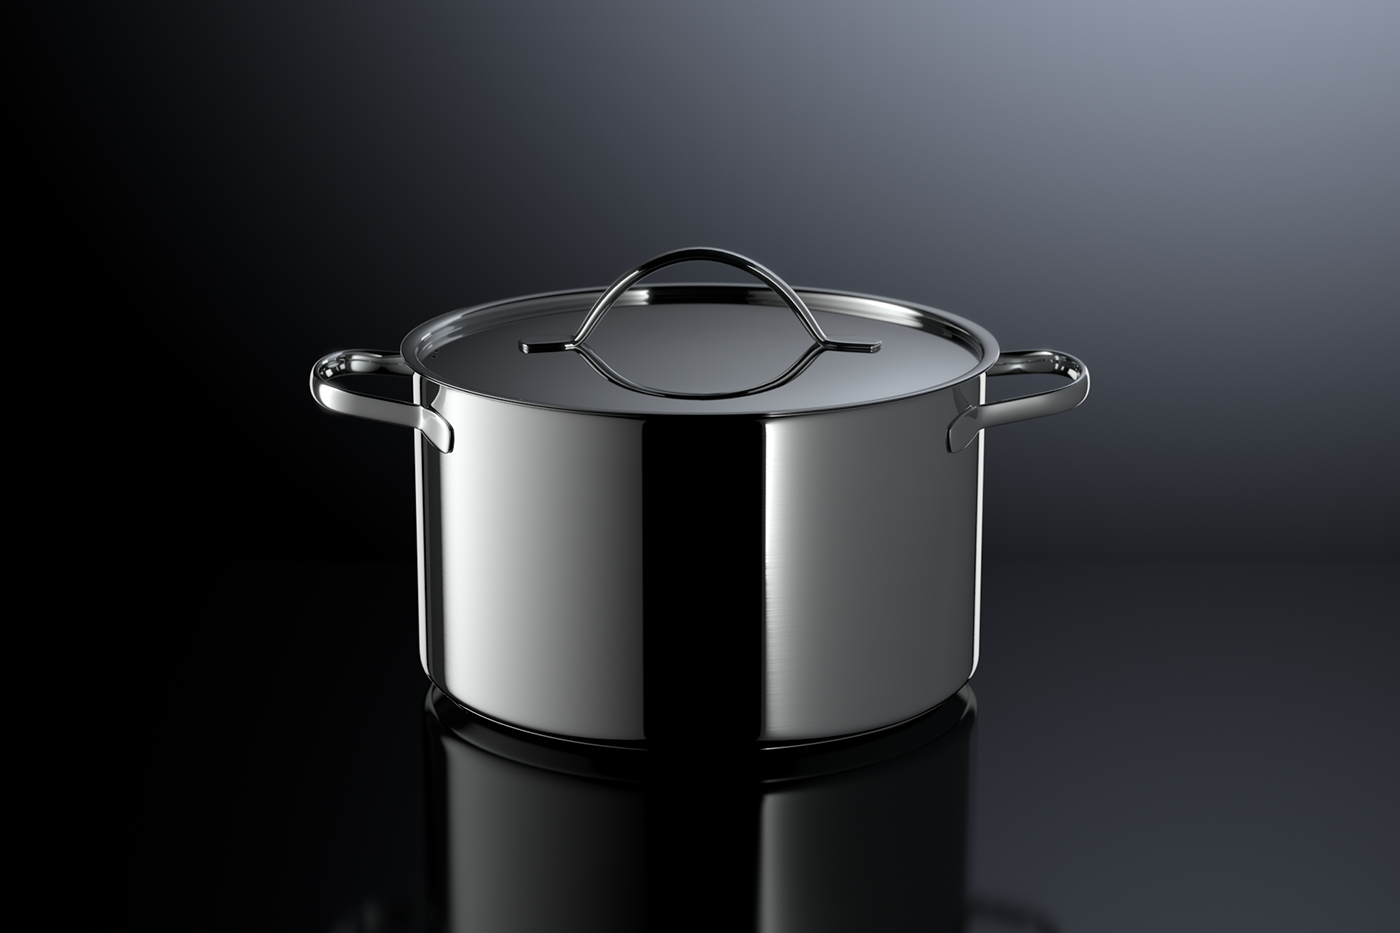 Cooking pot. Pot 88664-1. Stainless Steel kitchenware.